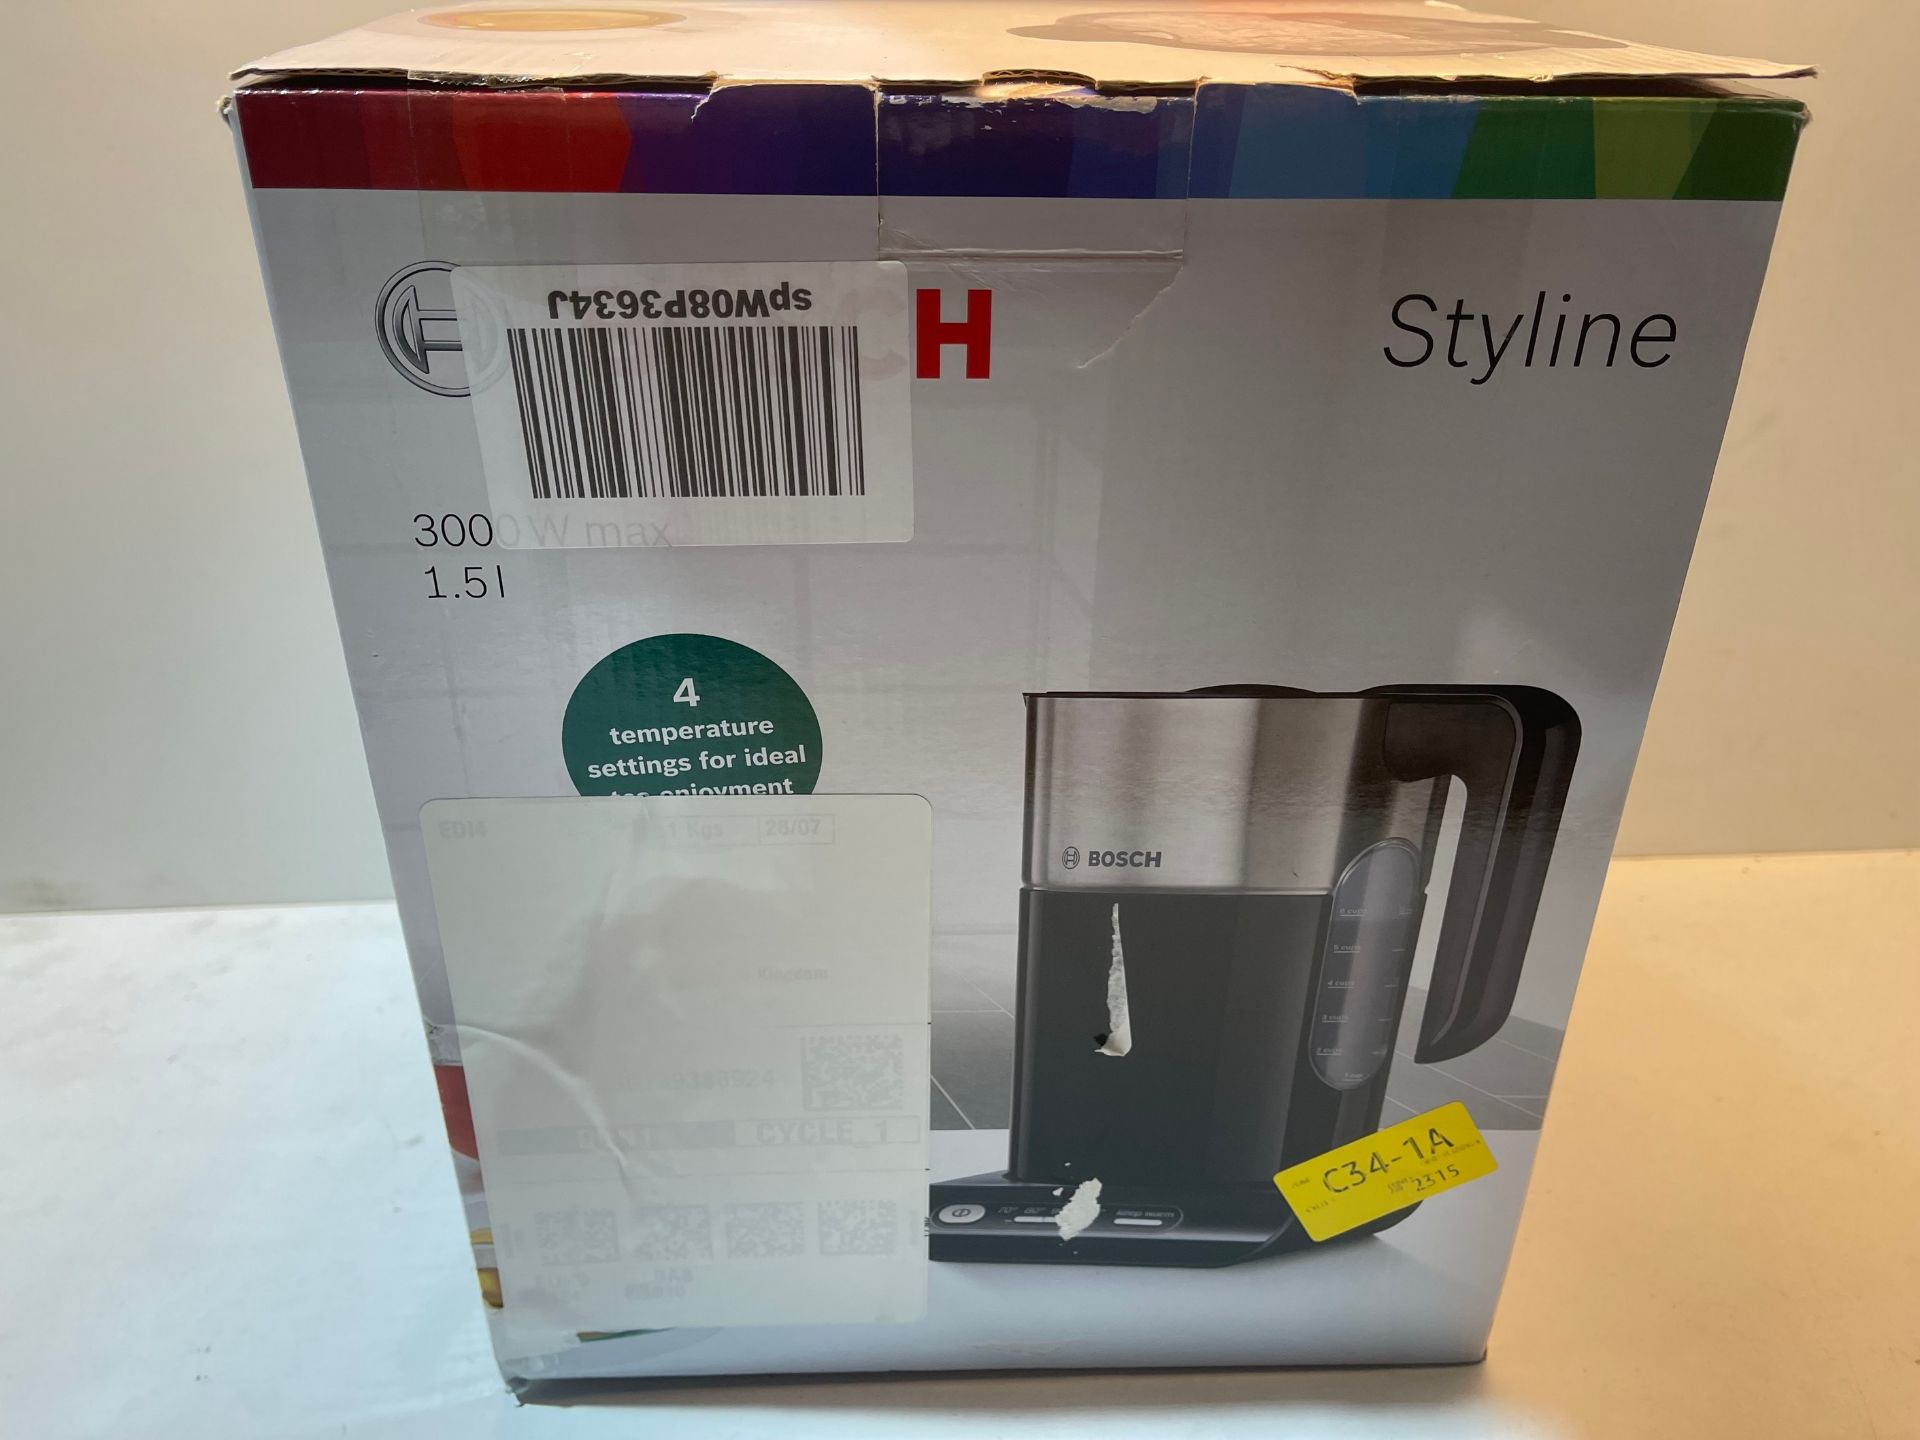 Bosch Styline TWK8633GB Variable Temperature Cordless Kettle, 1.5 Litres, 3000W - Black Â£59. - Image 2 of 2